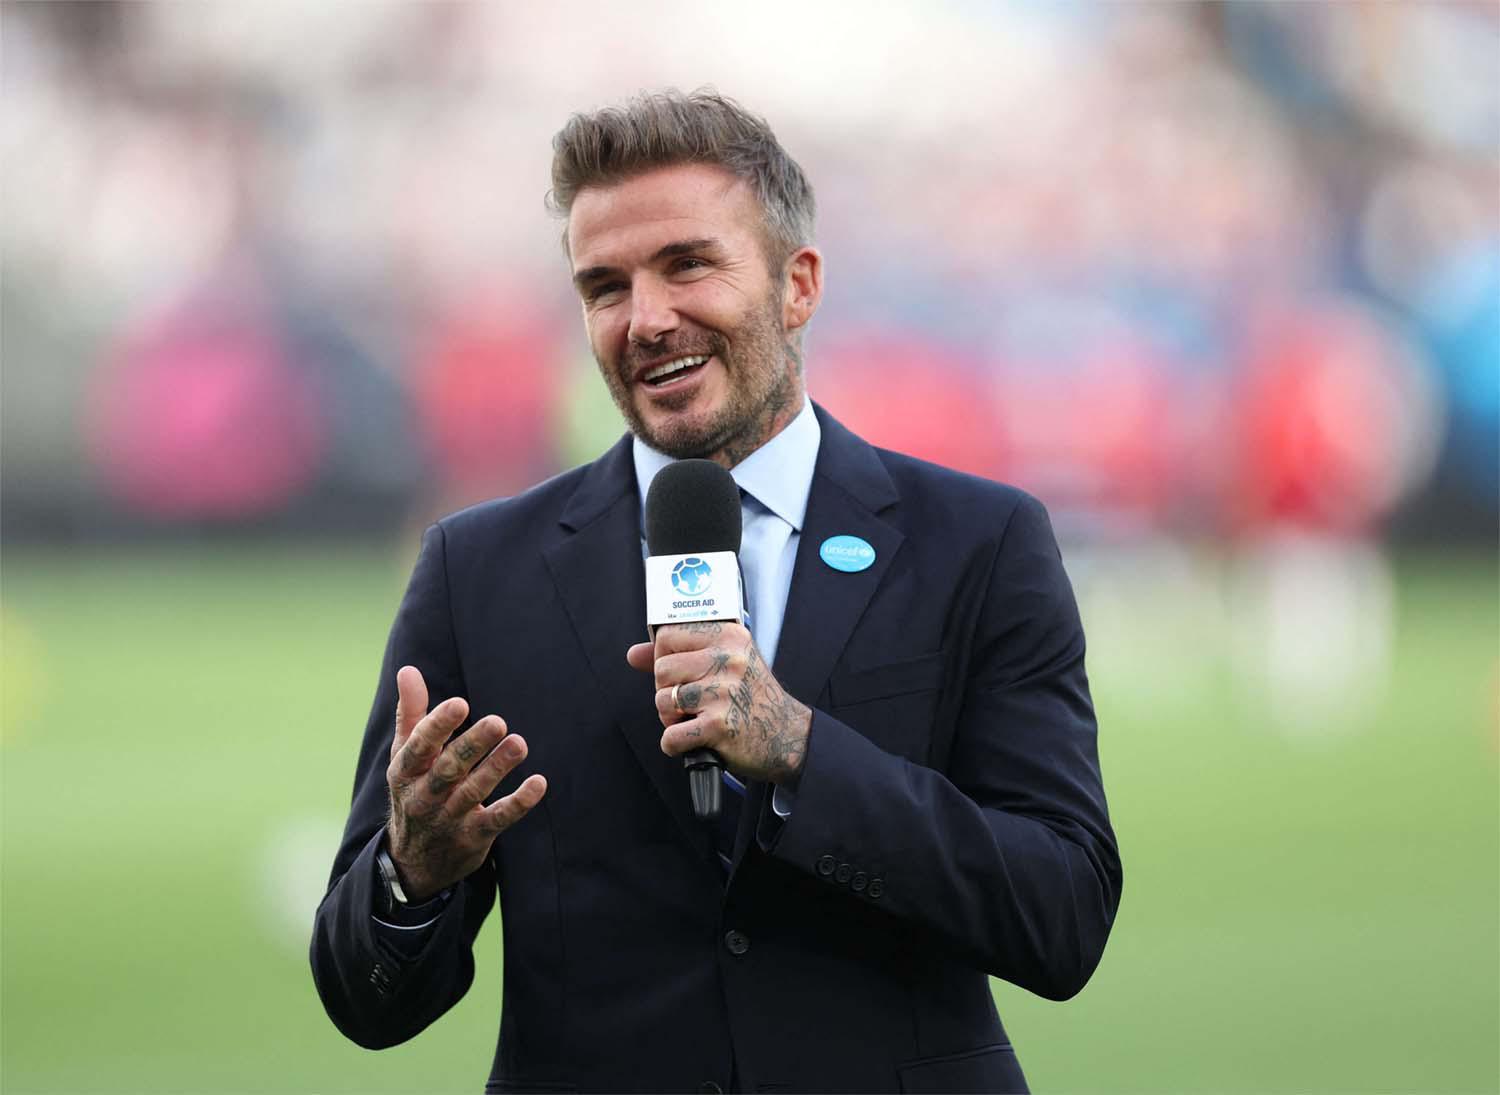 Beckham's ethics questioned